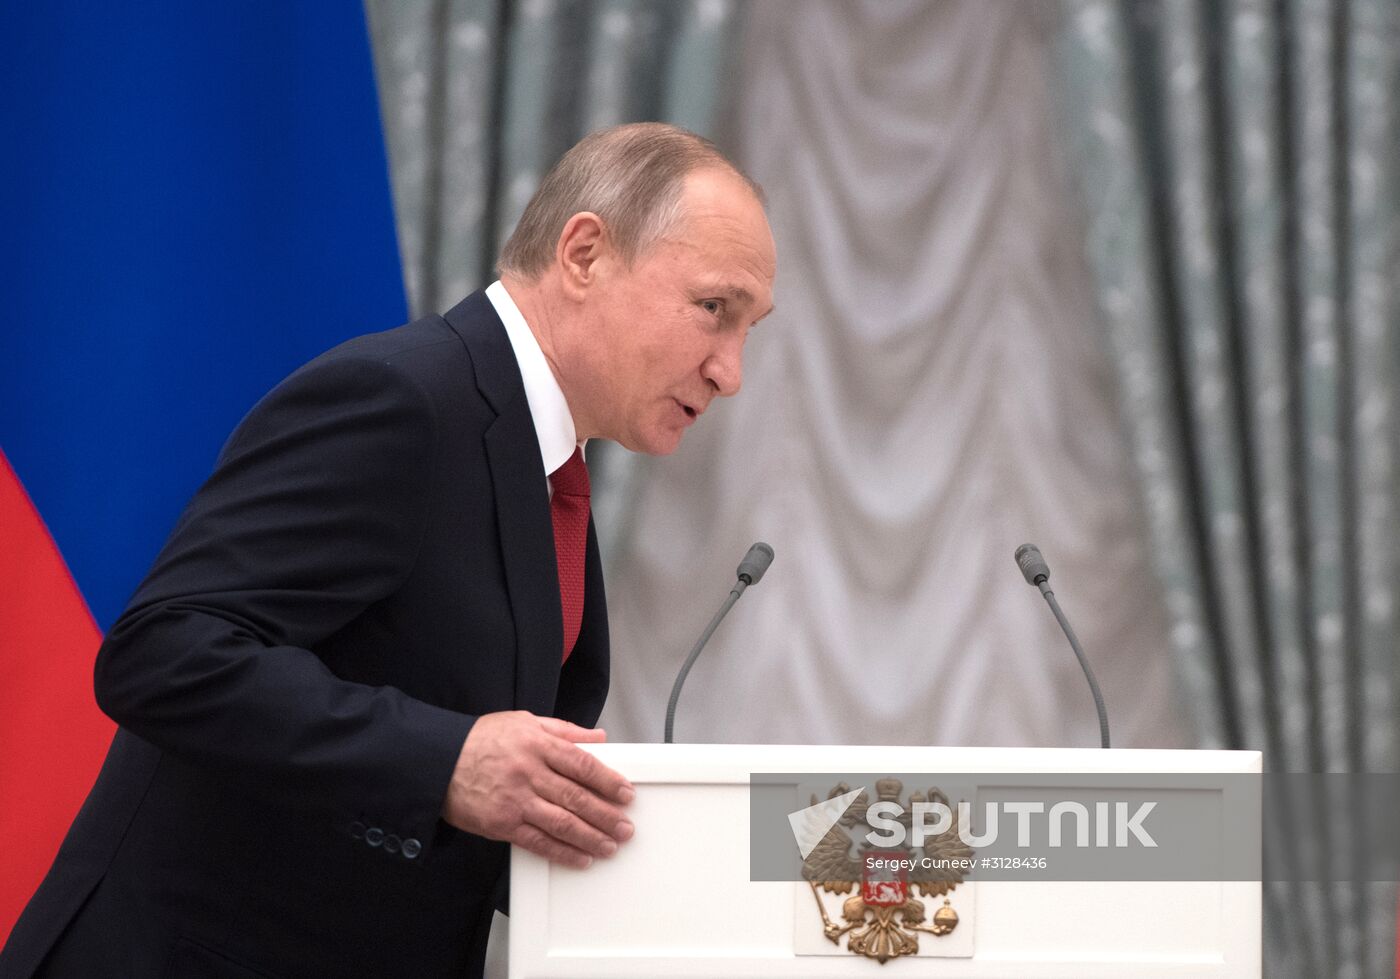 President Vladimir Putin presents passports to young Russians on Russia Day